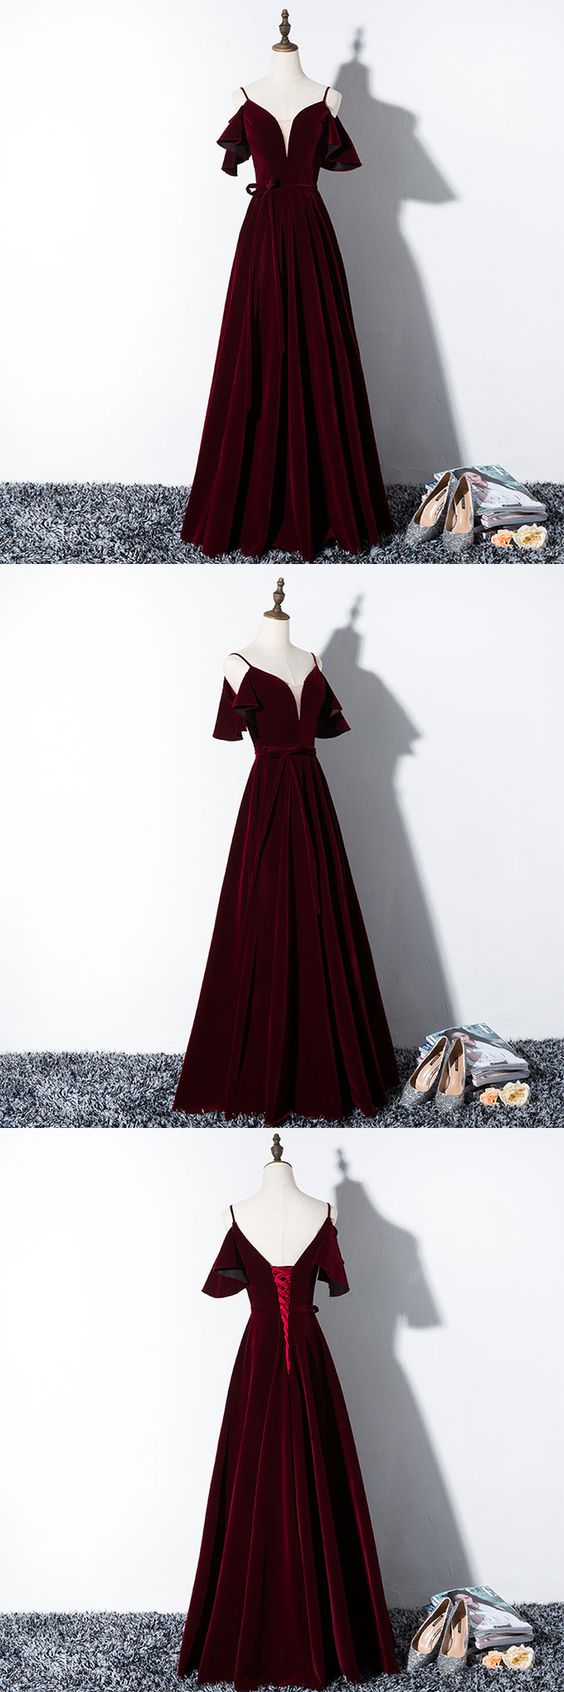 Sexy Burgundy Velvet Long Evening Dress Strapless Custom Made Prom Party Gowns, Custom Made Prom Gowns 2019